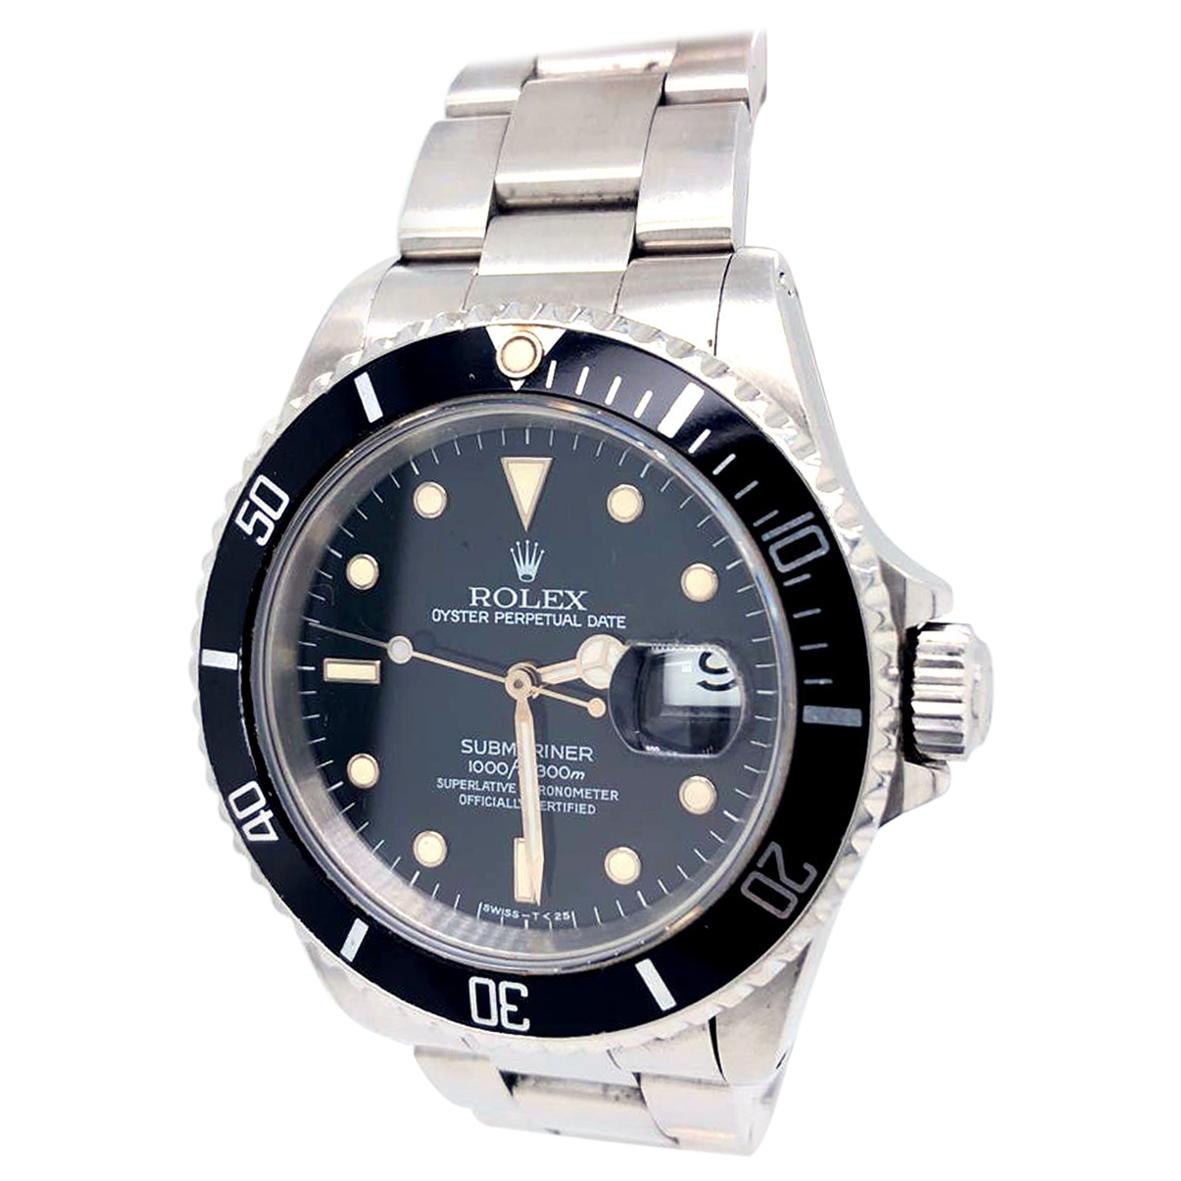 Rolex Submariner Date 40 Black Dial Oyster Stainless Steel Bracelet Watch 16610